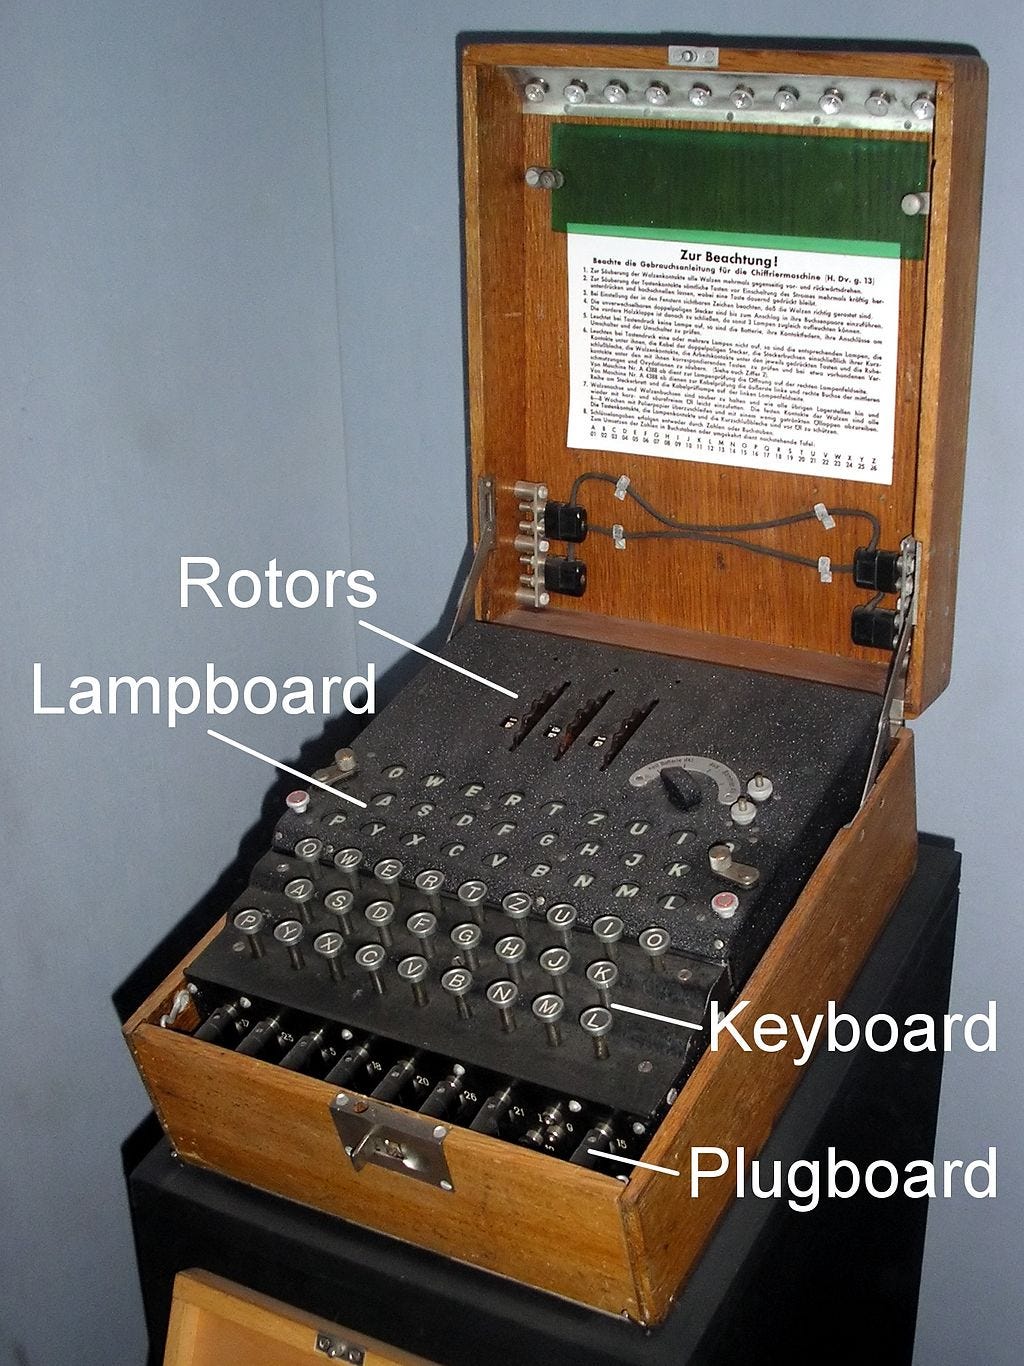 The most interesting story in the history of cryptology is probably the story of the German Enigma machine, Bletchley Park, Alan Turing, and the Bombe